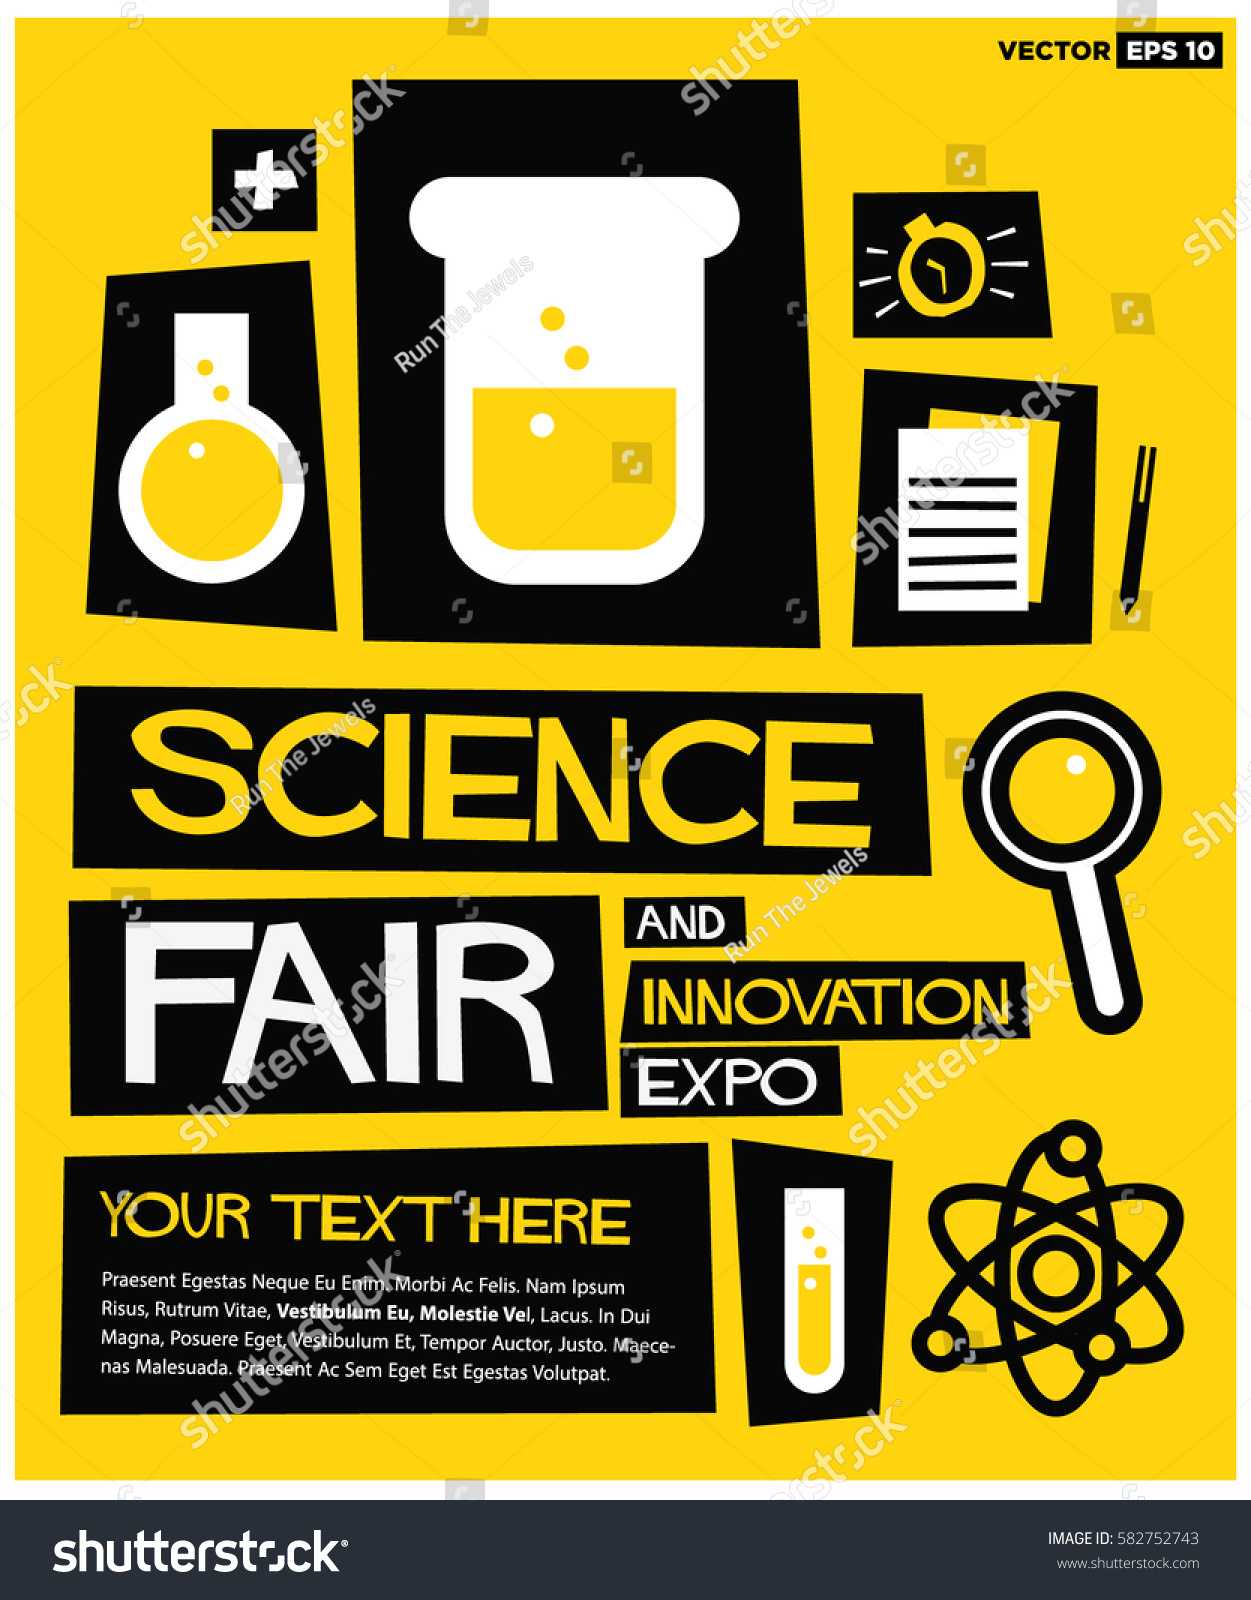 Science Fair Innovation Expo Flat Style Stock Vector With Science Fair Banner Template